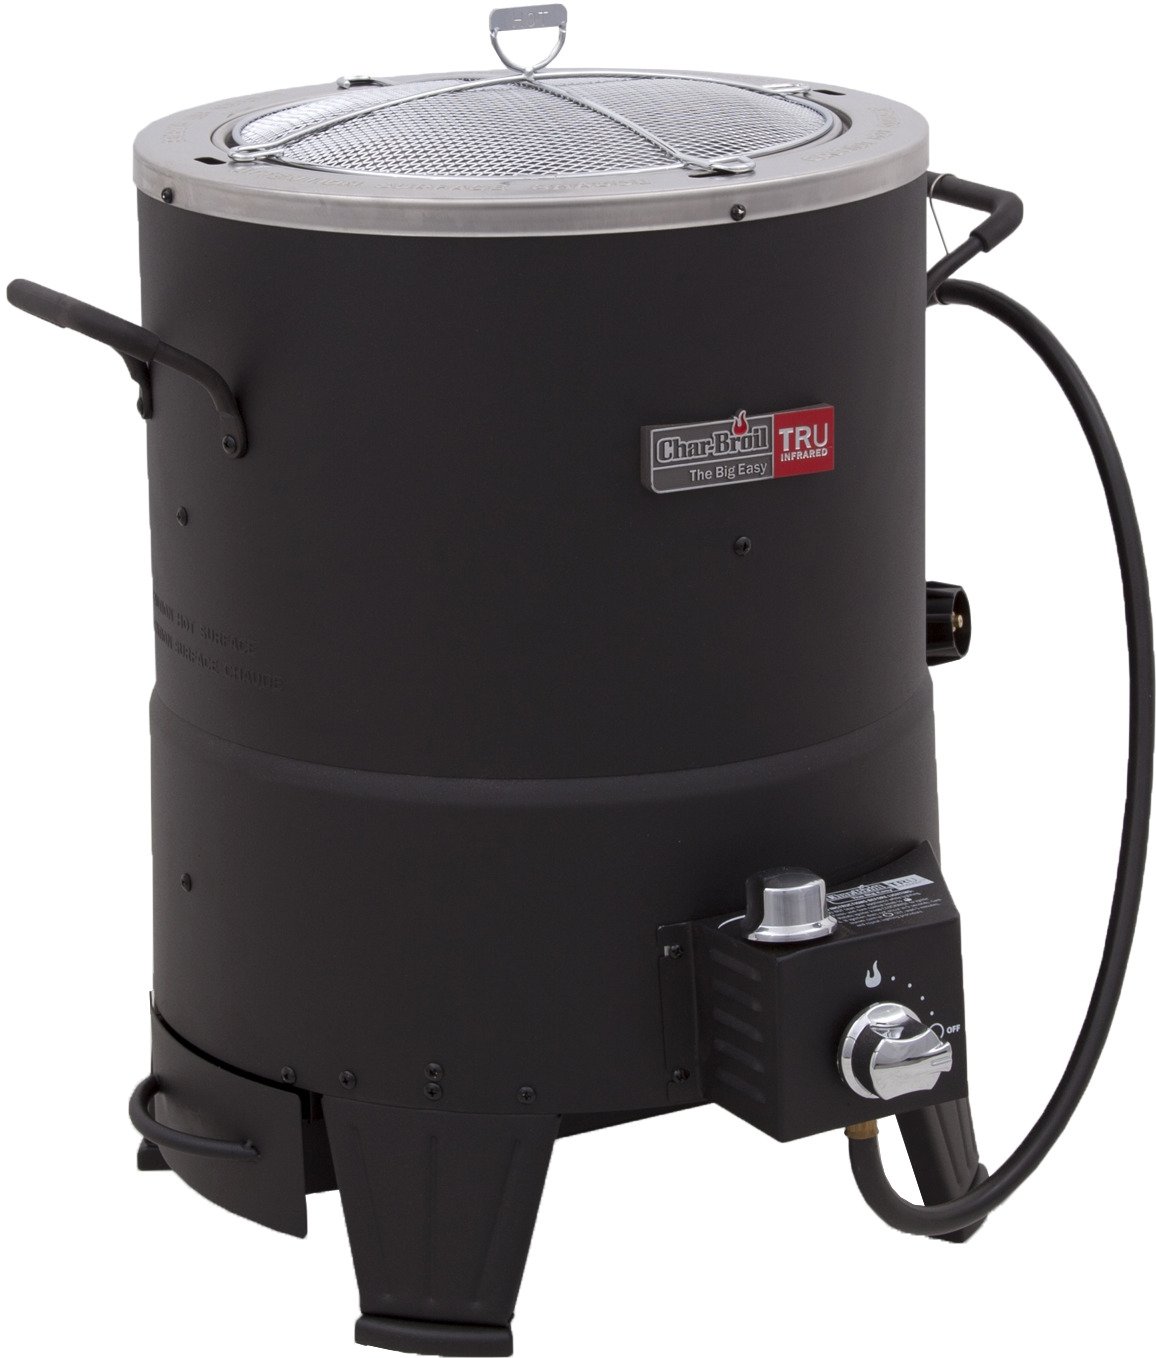 How Does The Big Easy® Turkey Fryer Work?